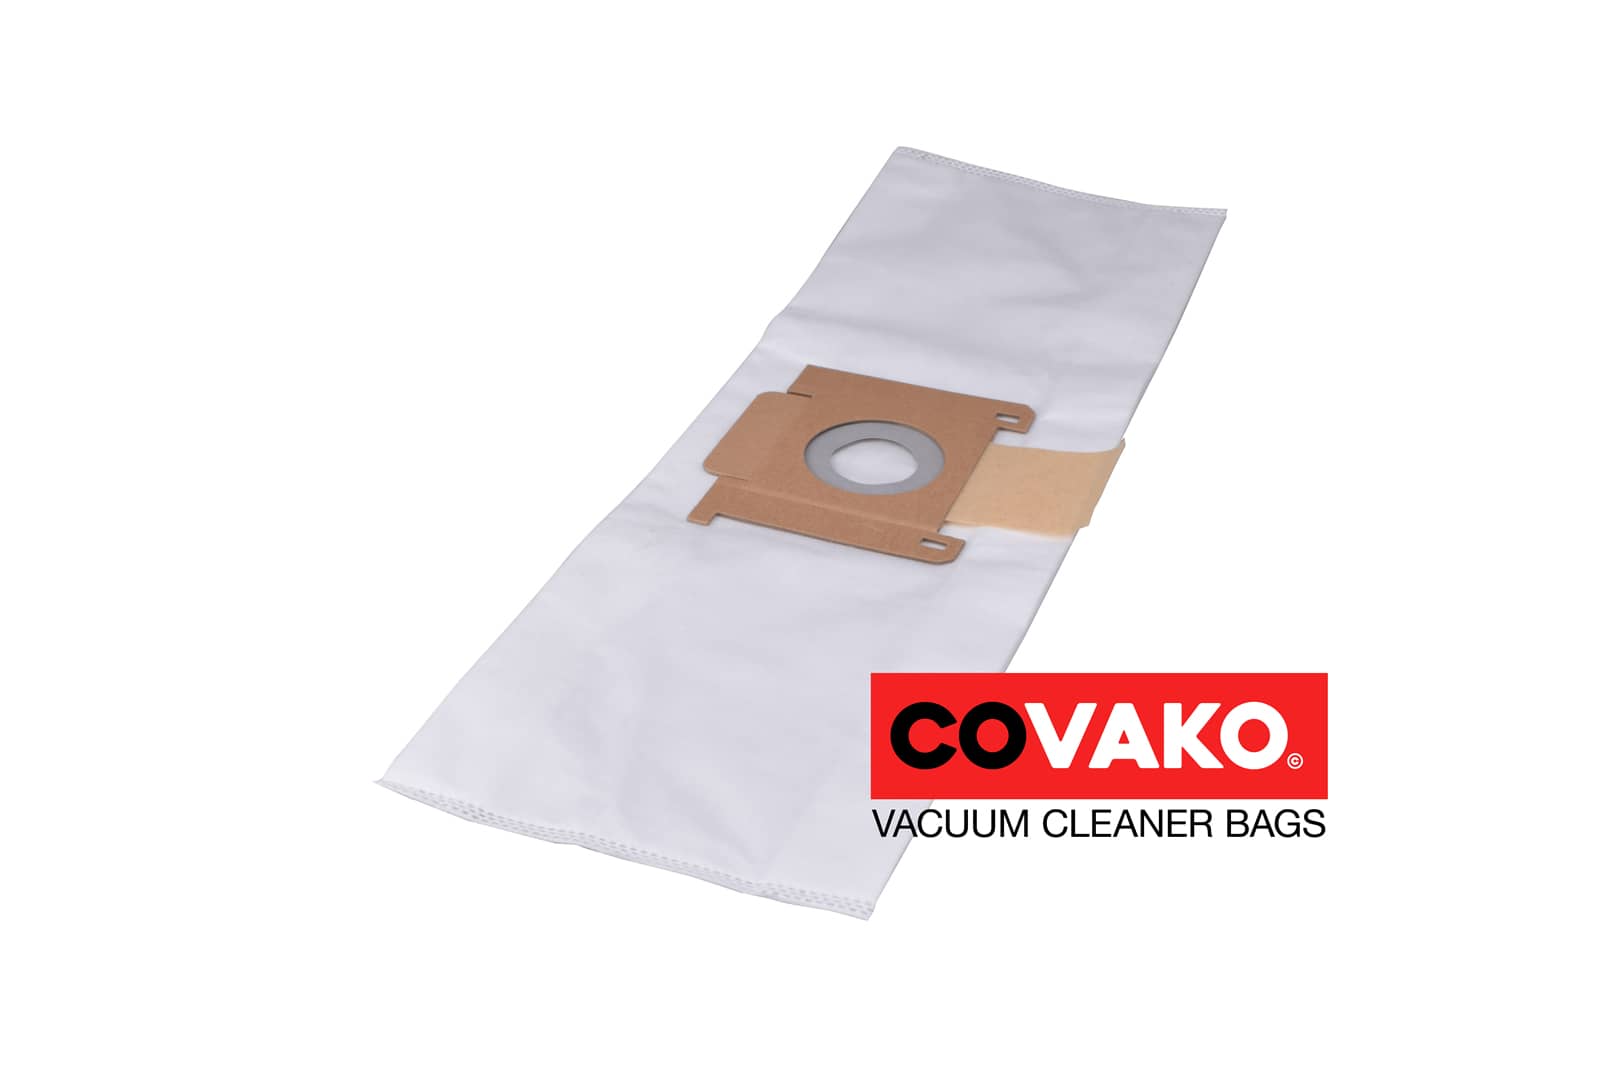 Fast Hi-Filtration 6.0 Save / Synthesis - Fast vacuum cleaner bags